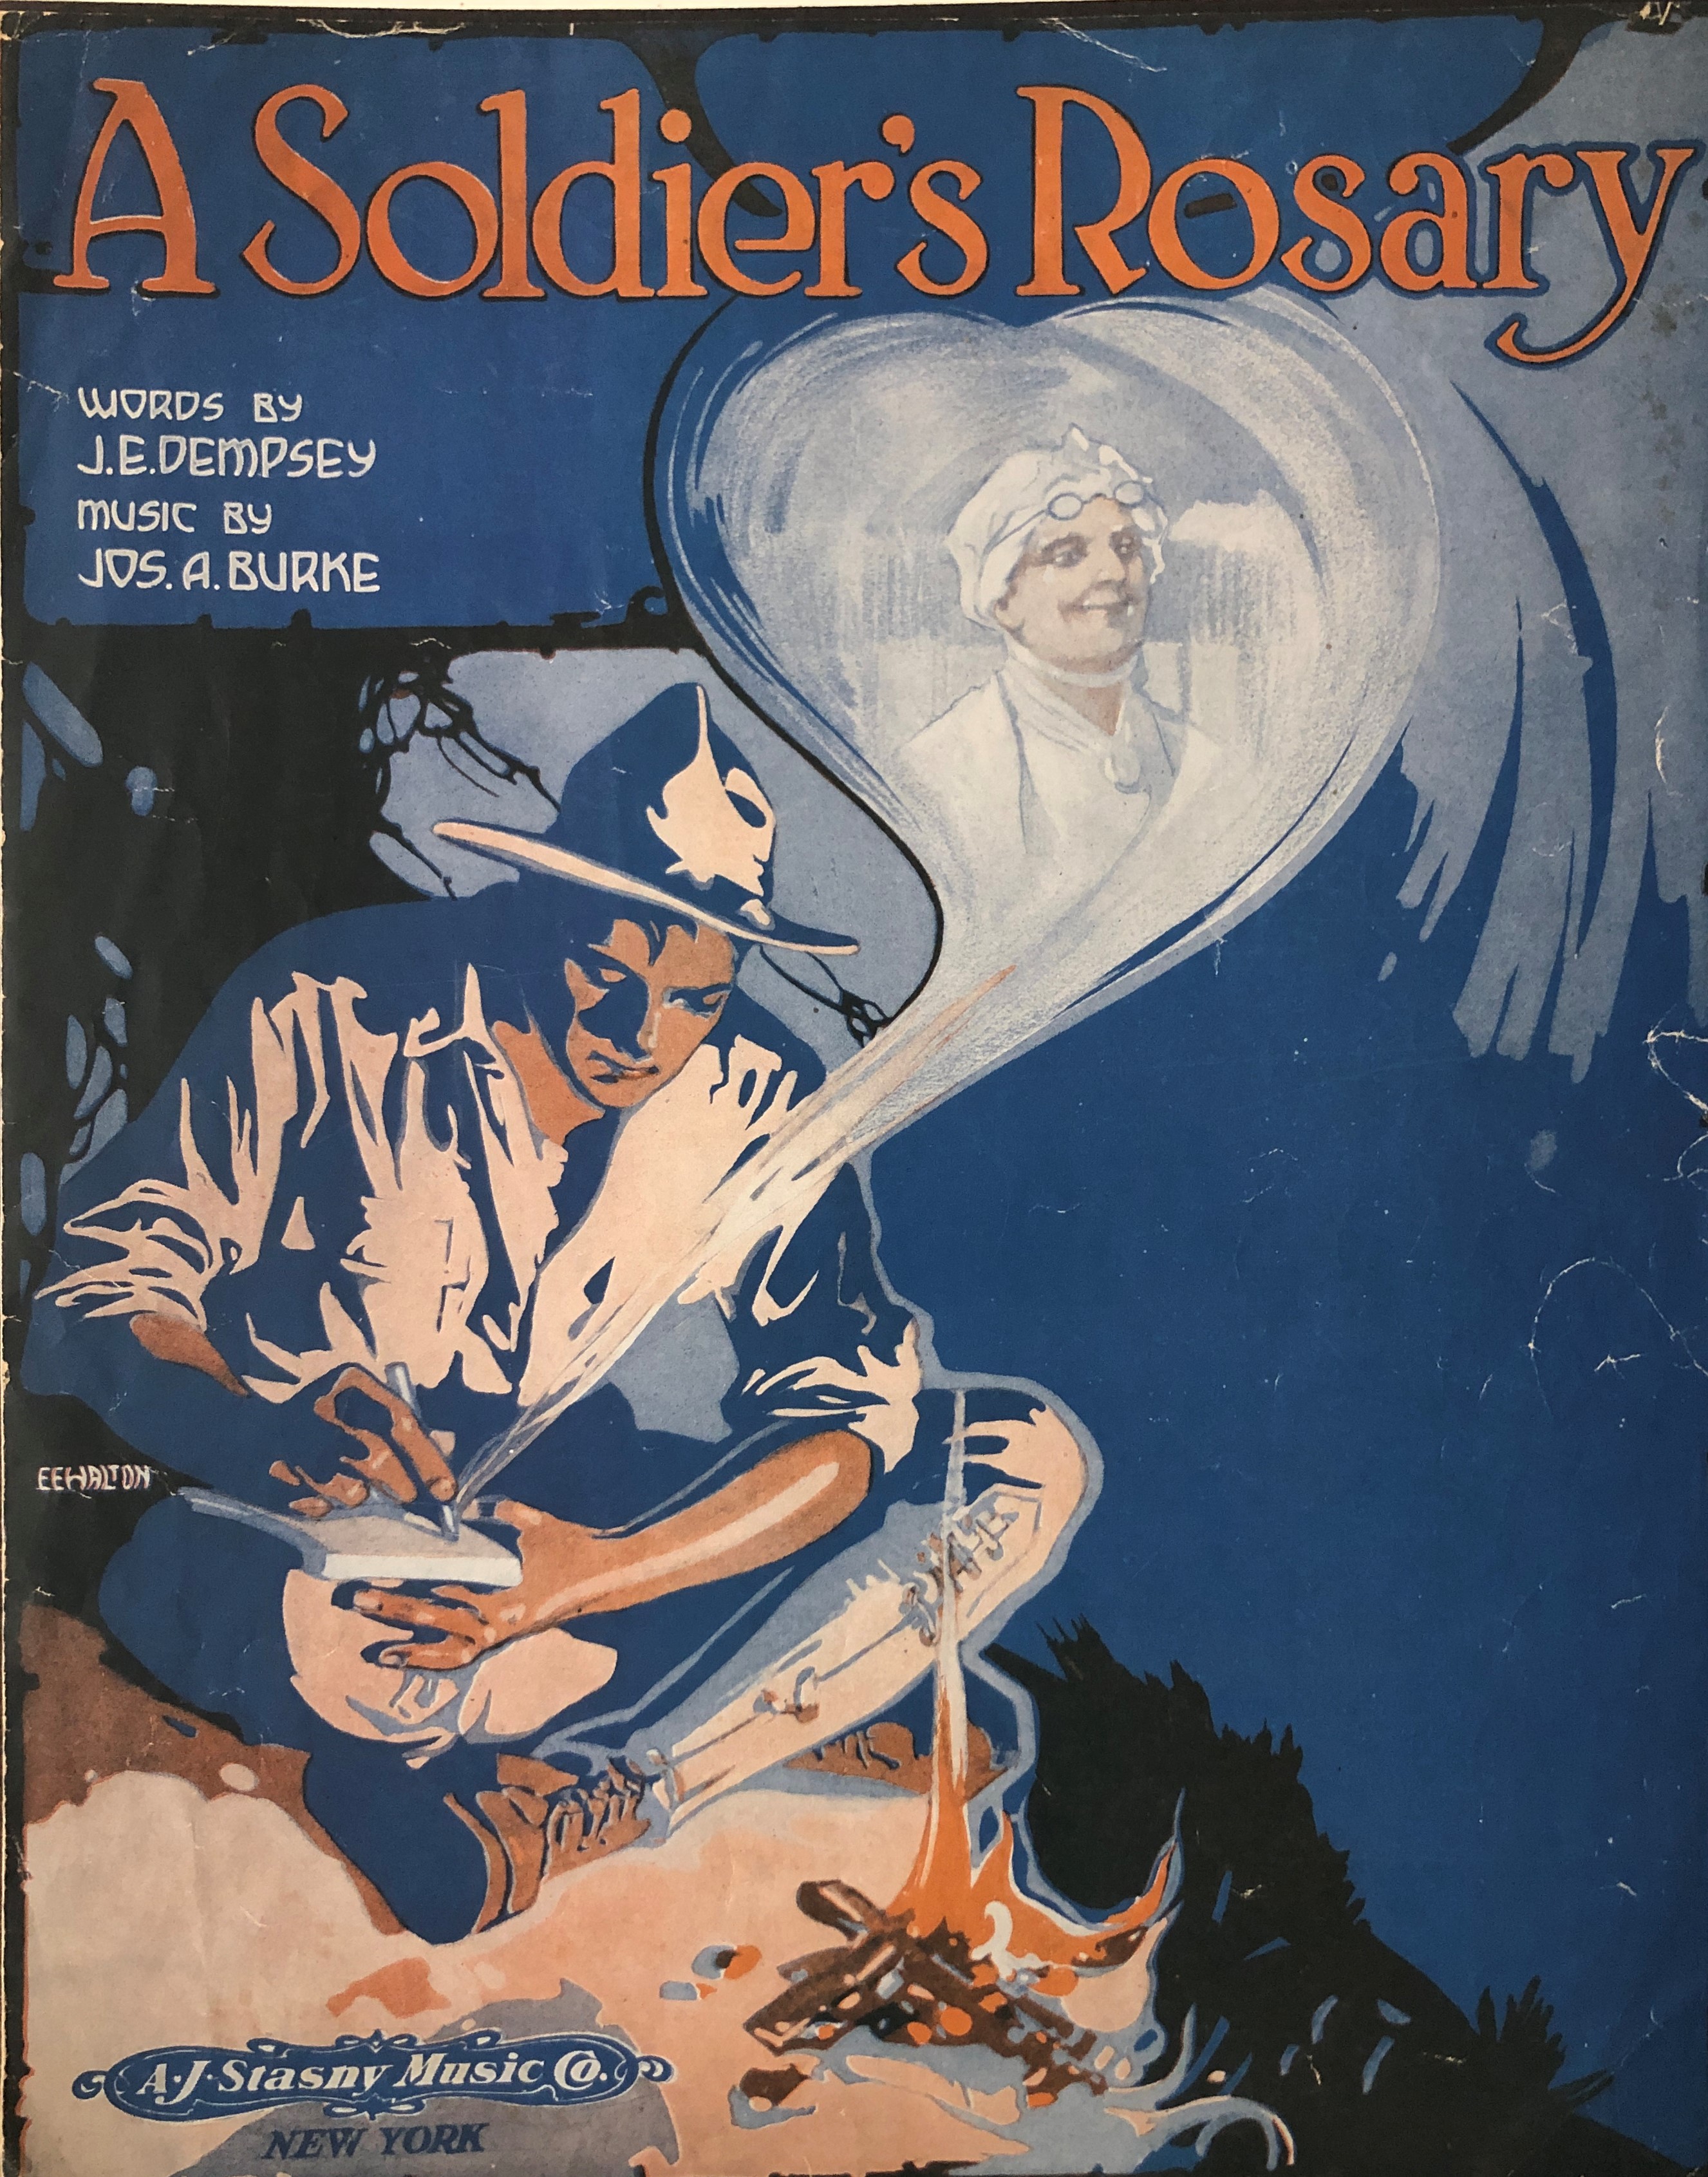 Cover illustrated with a soldier writing a letter and an image of a mother illustrated in a heart-shaped callout 